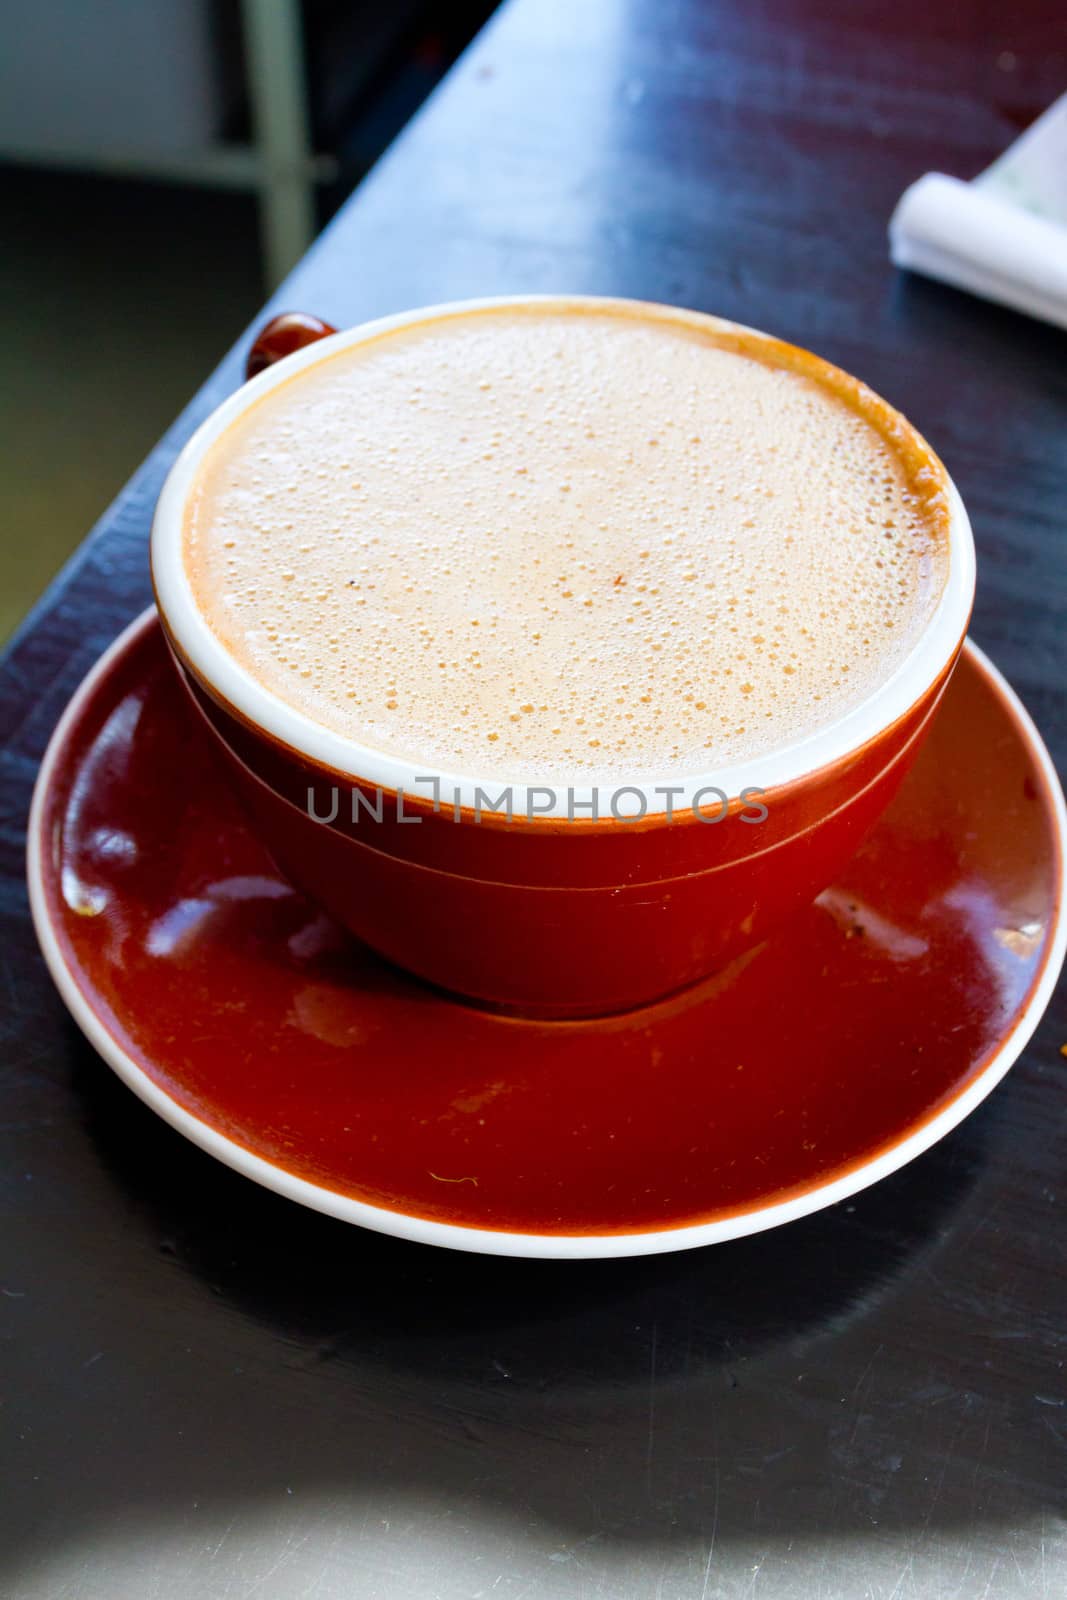 A mocha is served in a ceramic mug at a restaurant that makes amazing coffee and latte.